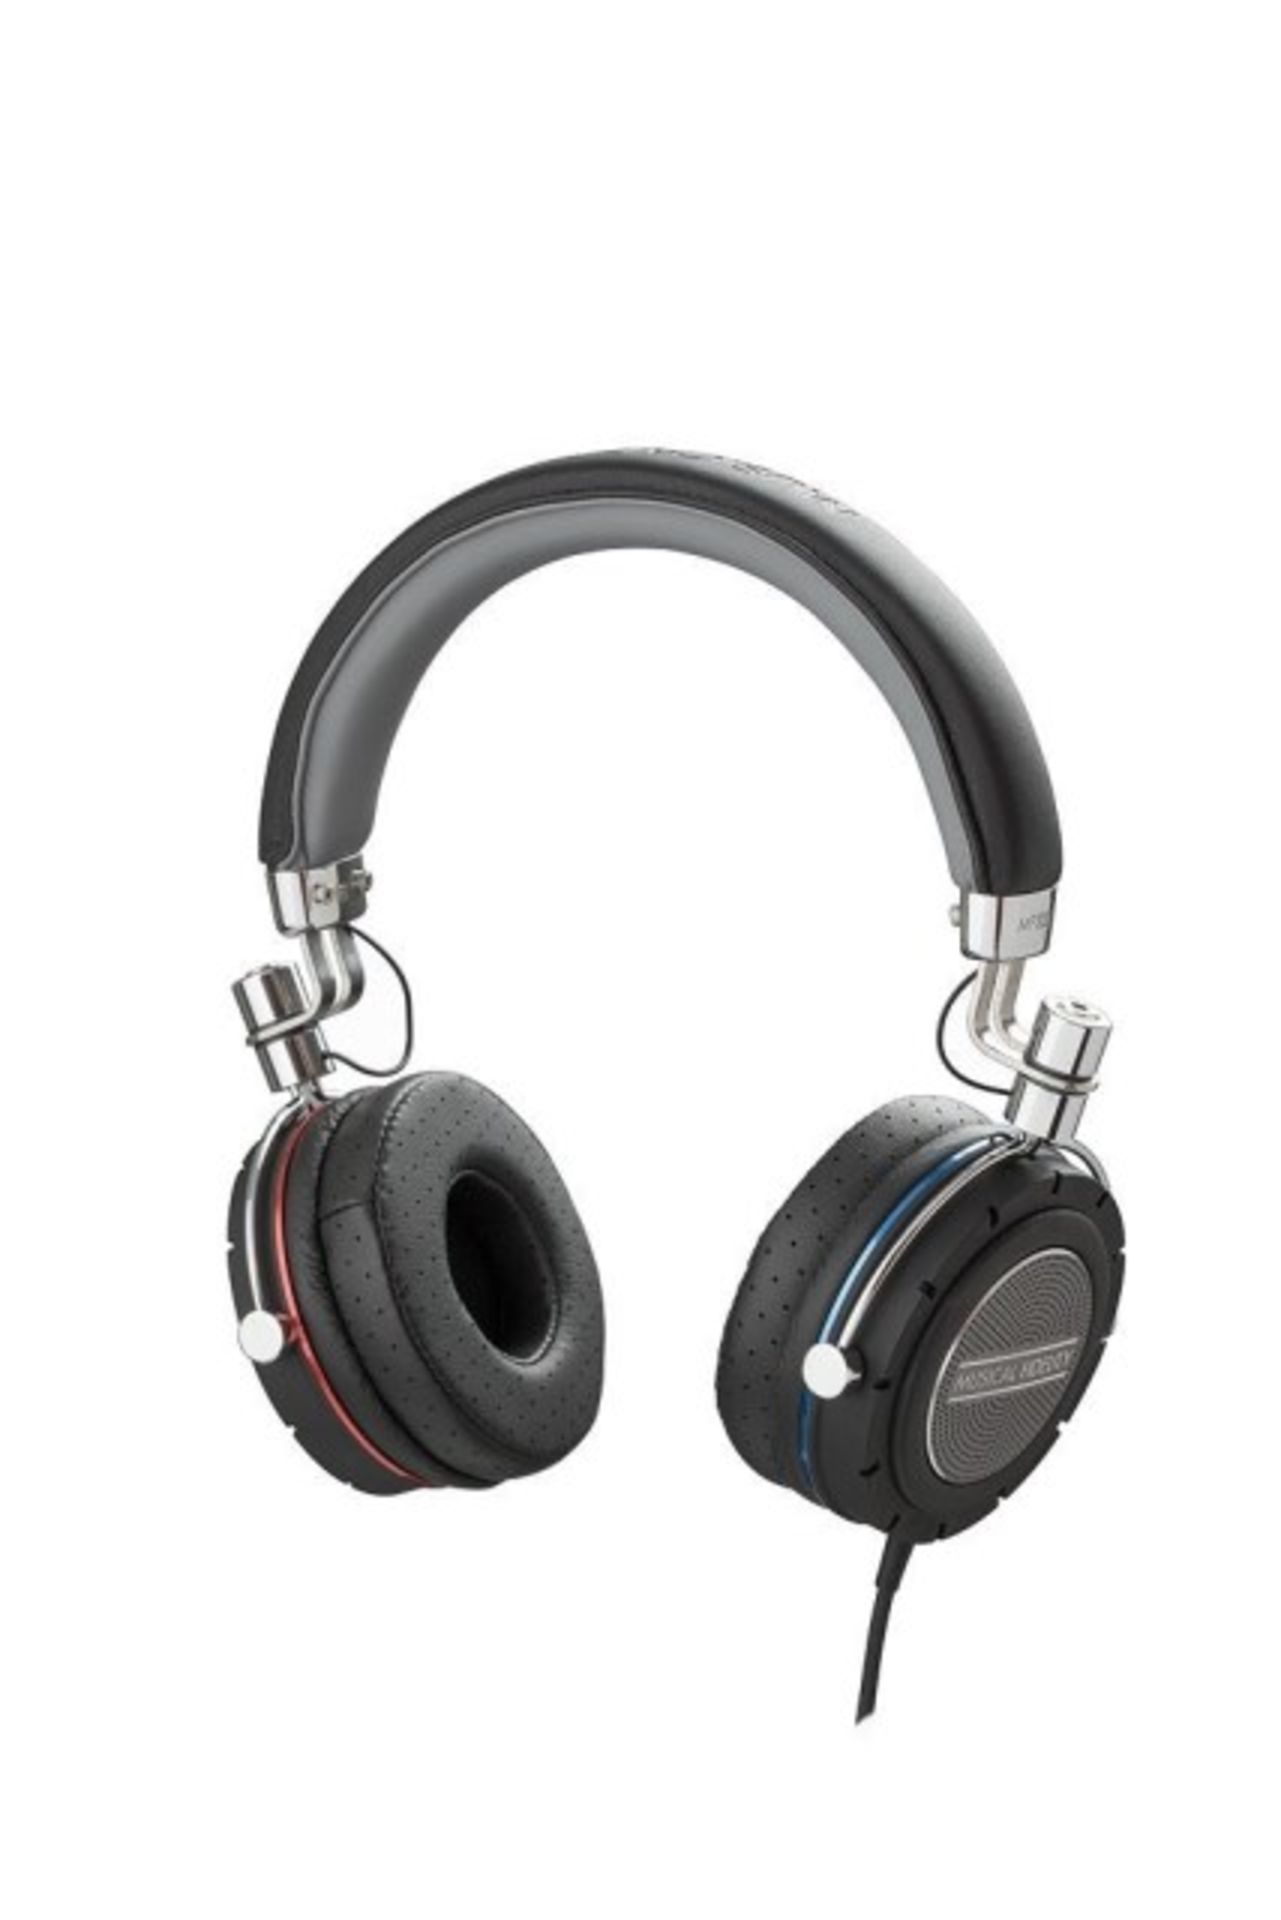 V *TRADE QTY* Brand New Musical Fidelity MF-200 Headphones (Brand New & Sealed) RRP £249 X 5 YOUR